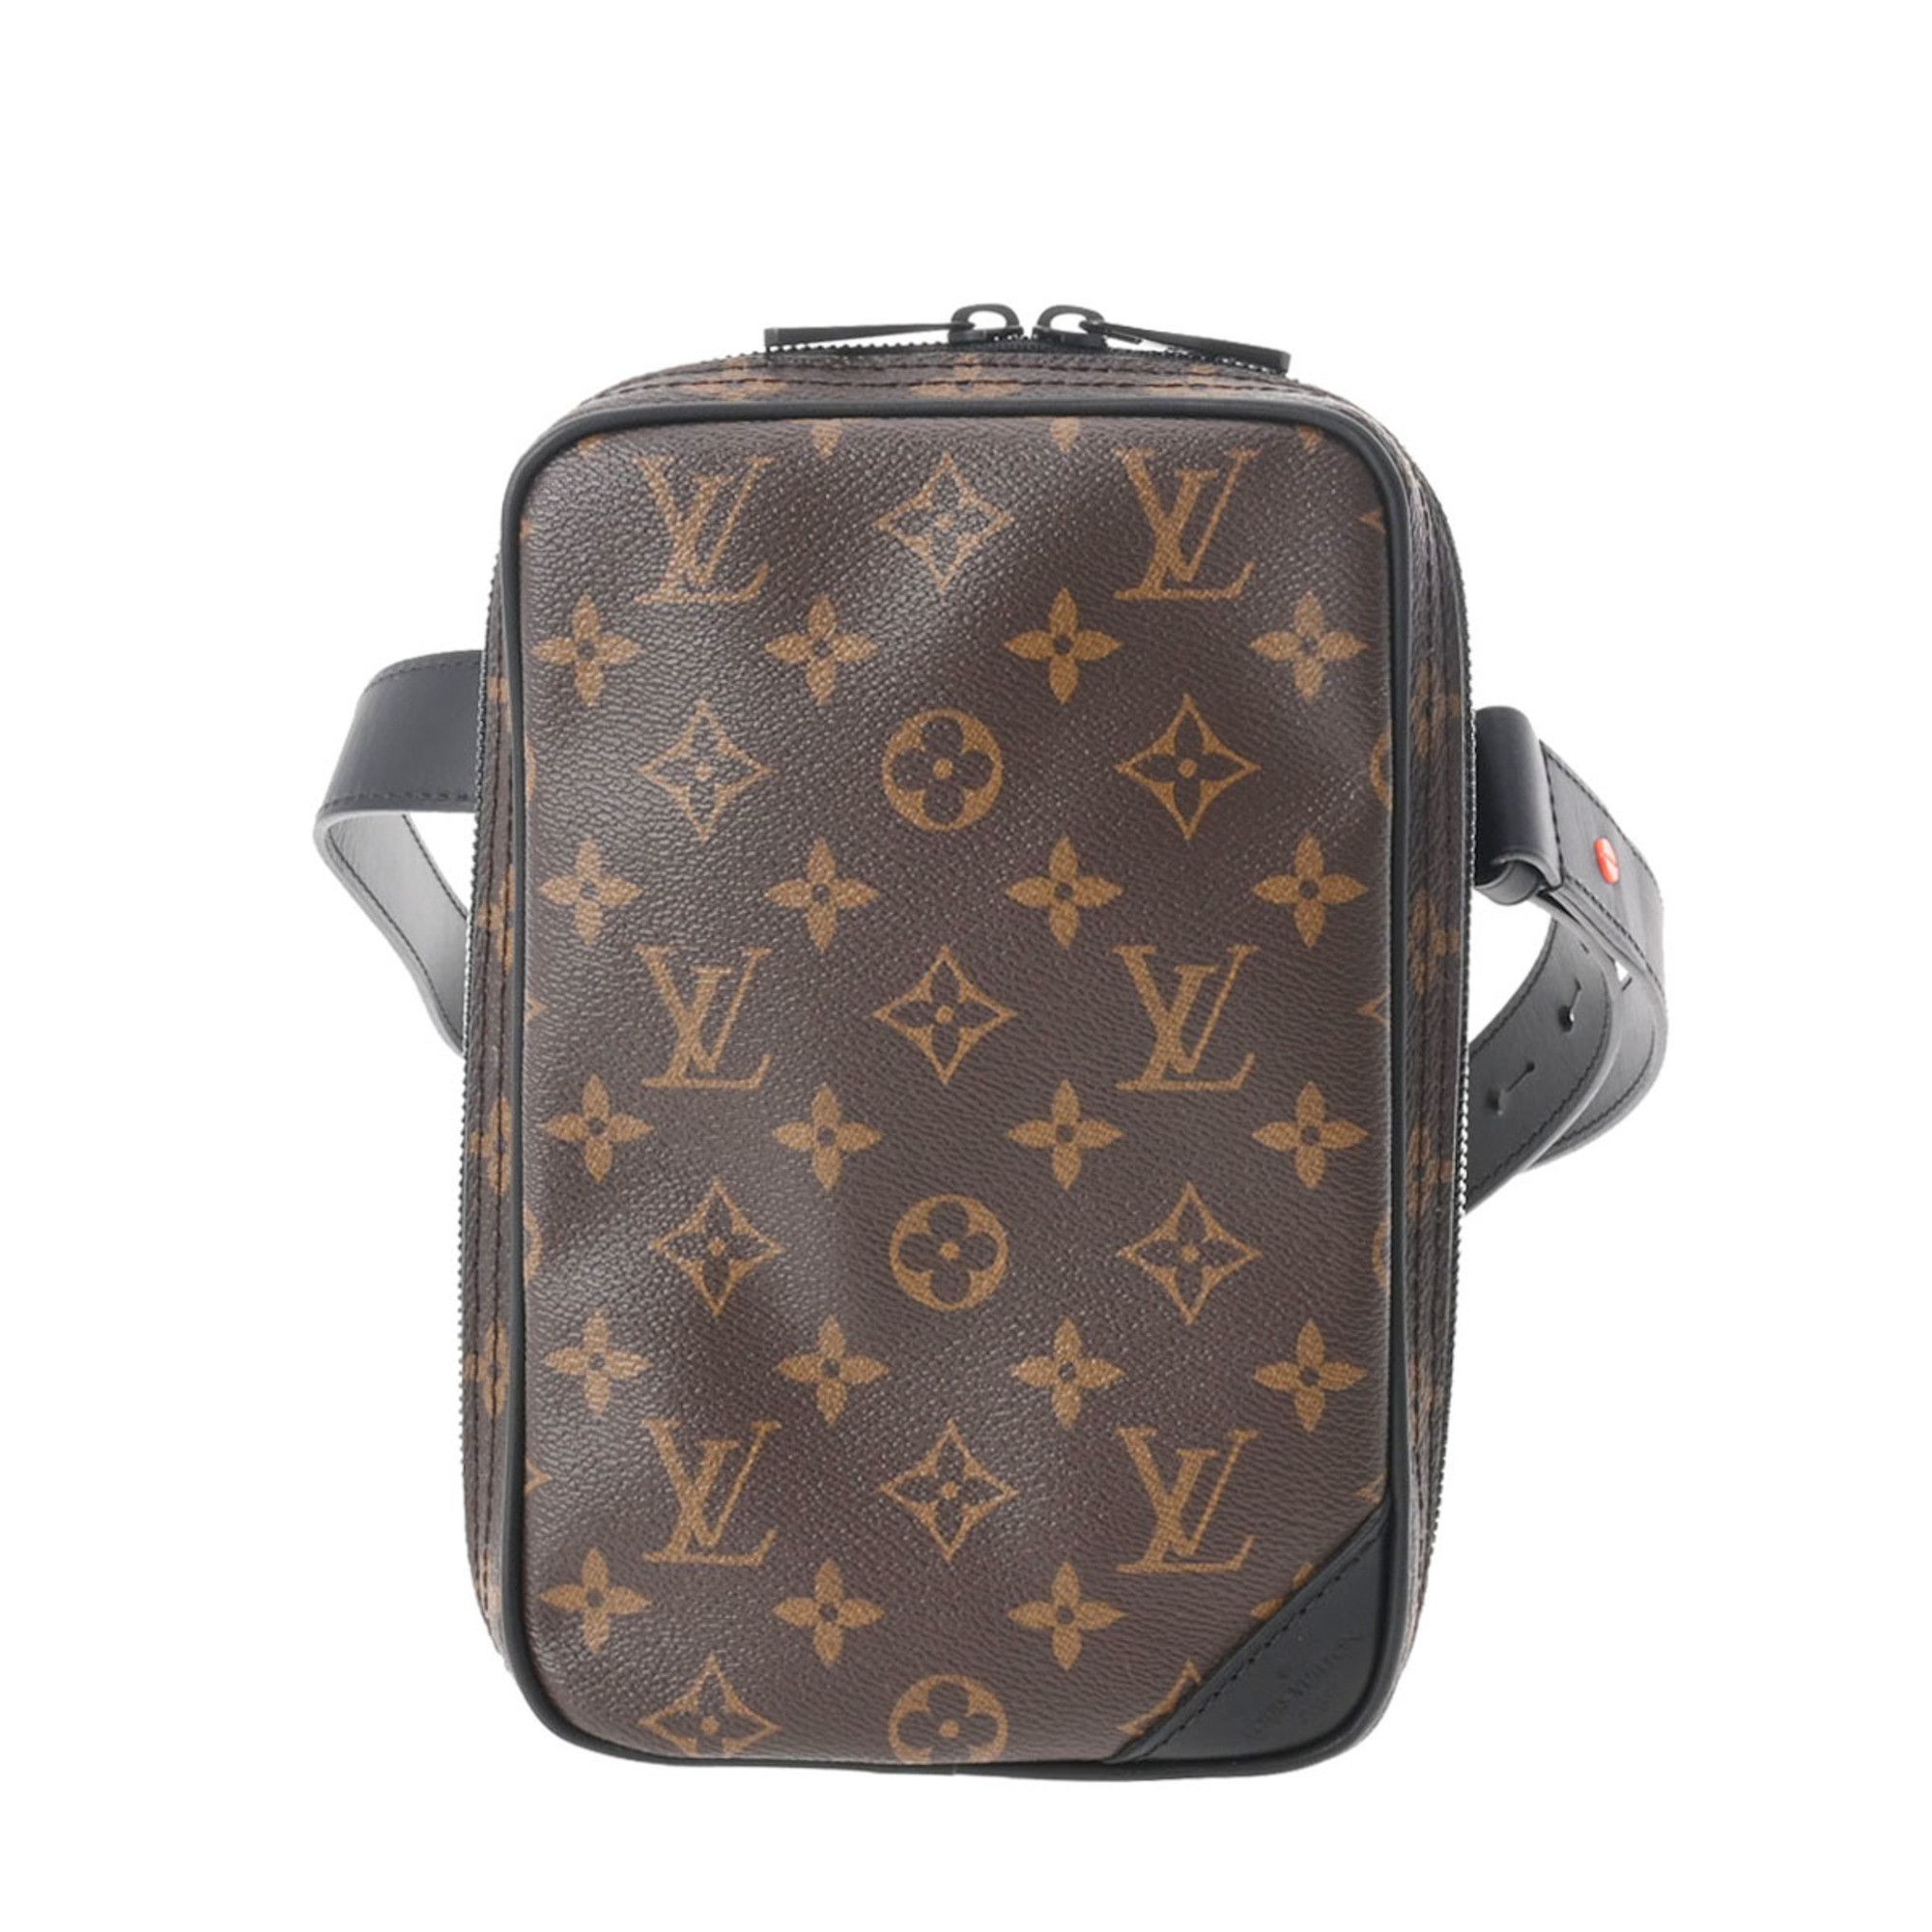 Comparing my Louis Vuitton Utility Crossbody and Papillon Trunk